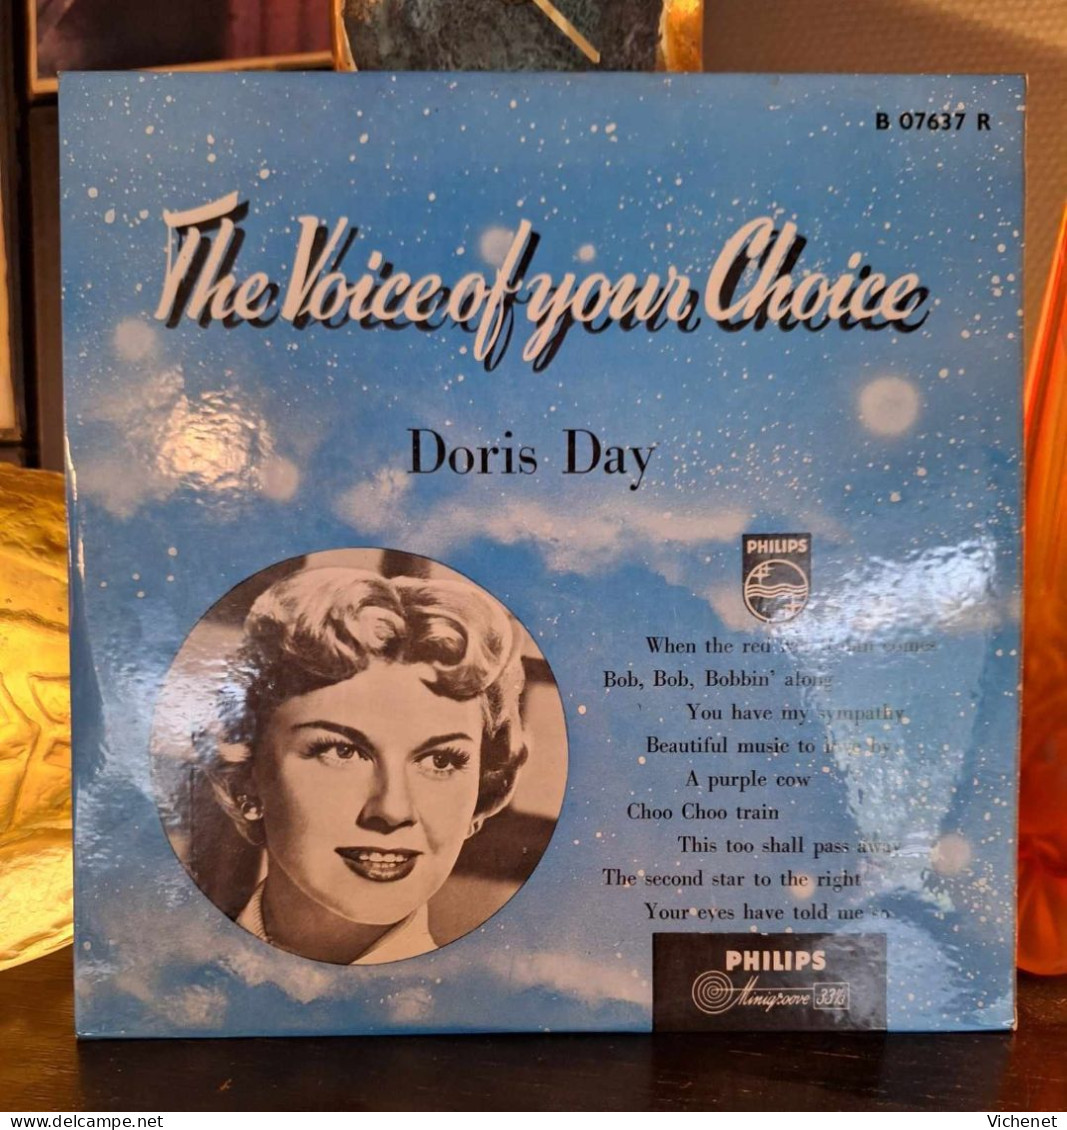 Doris Day - The Voice Of Your Choice - 25 Cm - Formati Speciali